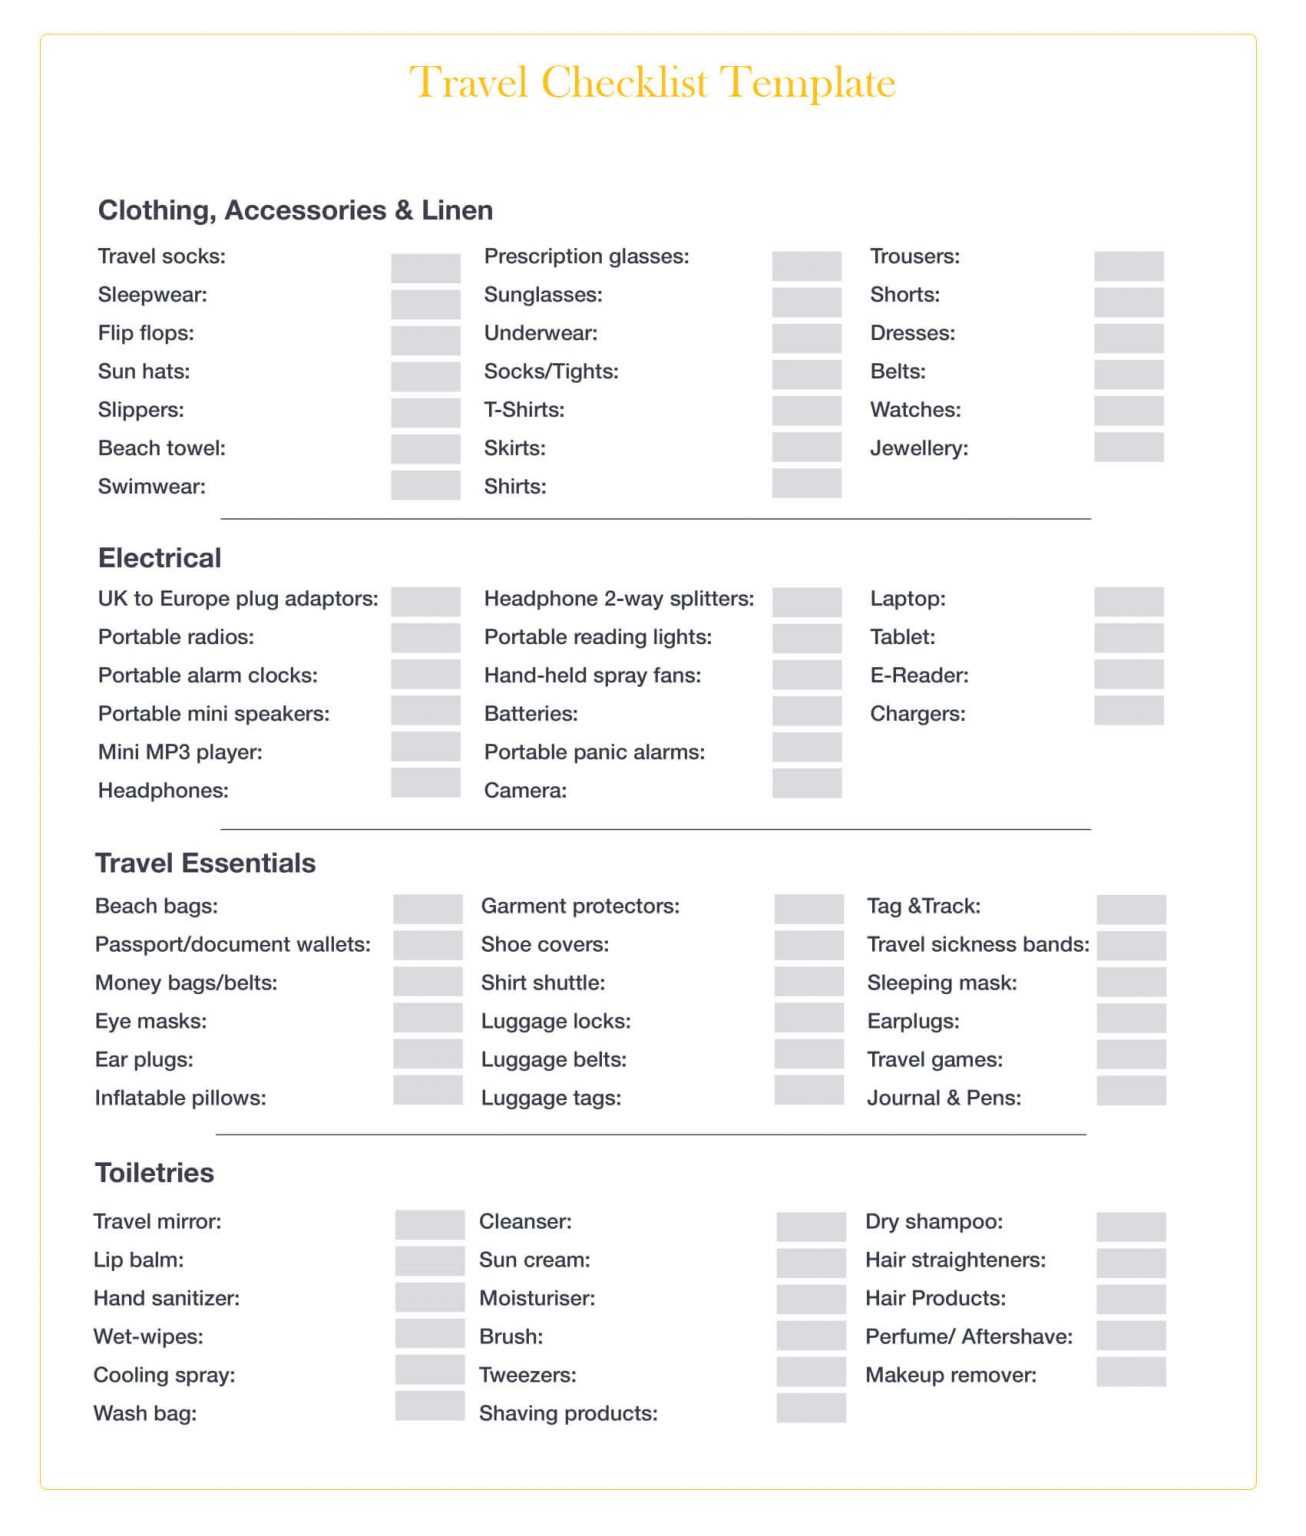 example of traveling checklist template